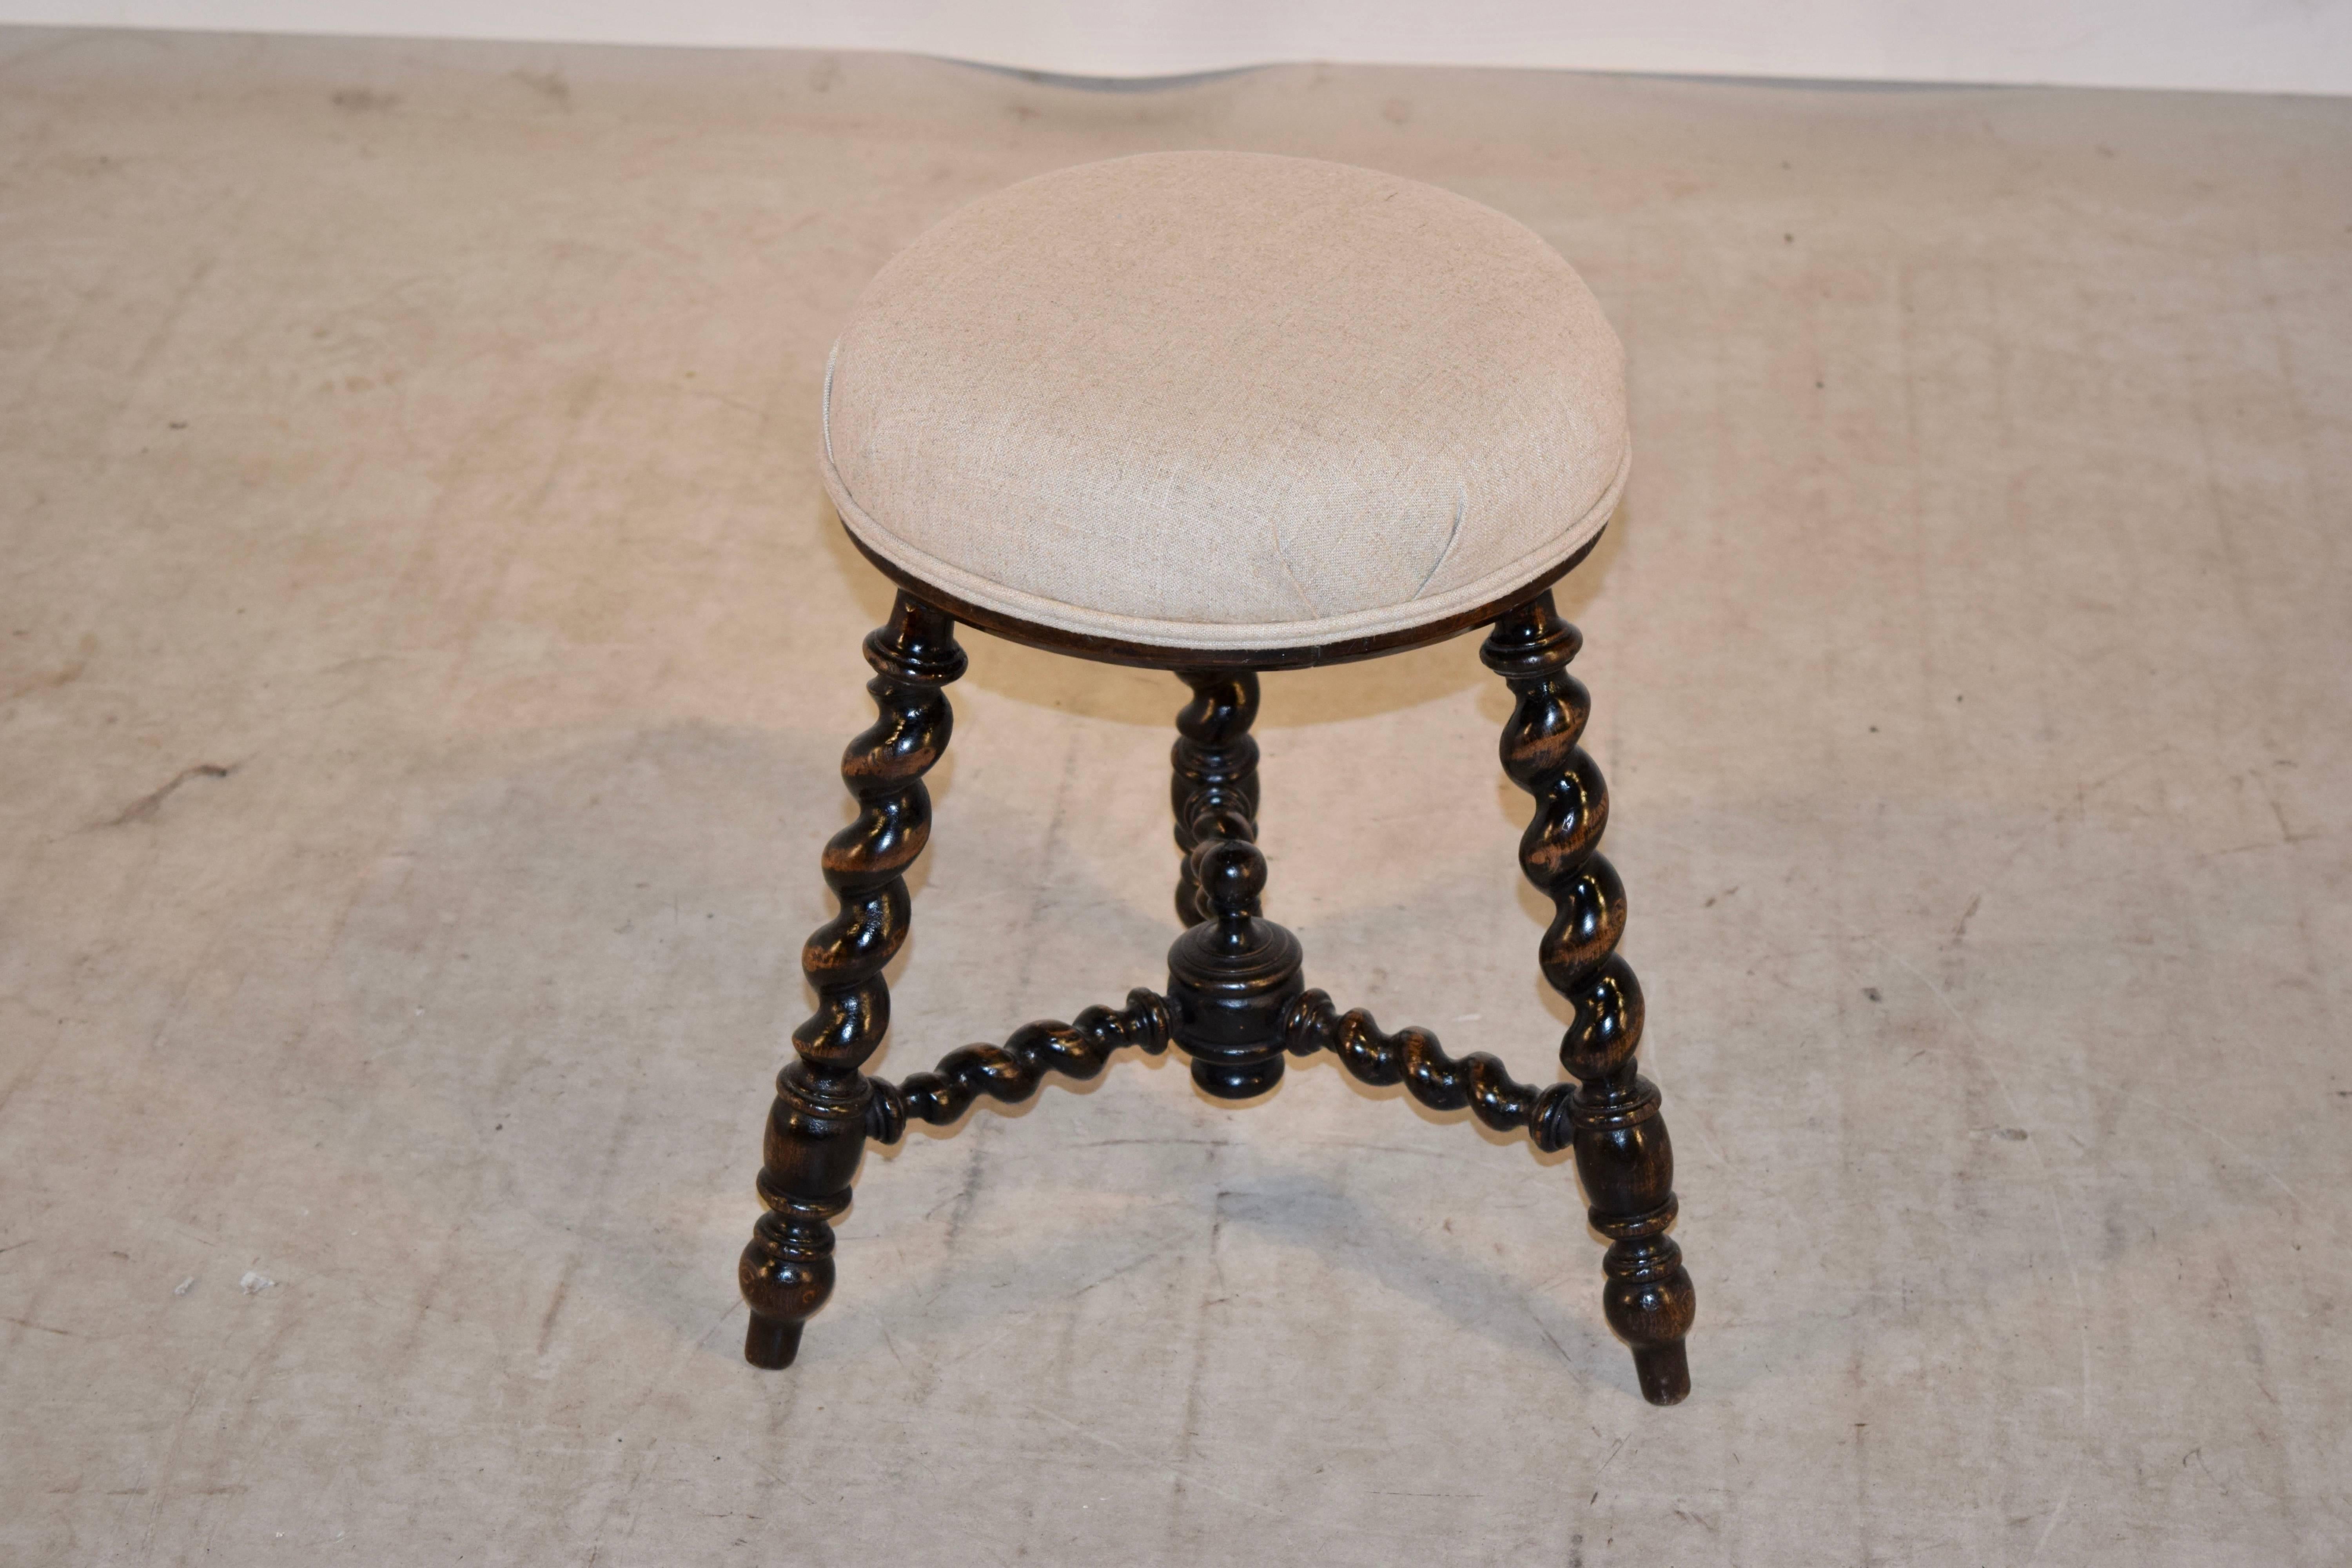 19th century English stool made from mahogany. The seat has been newly upholstered in linen and finished with a double welt decoration. The legs are hand-turned barley twist and are splayed and joined by matching stretchers.